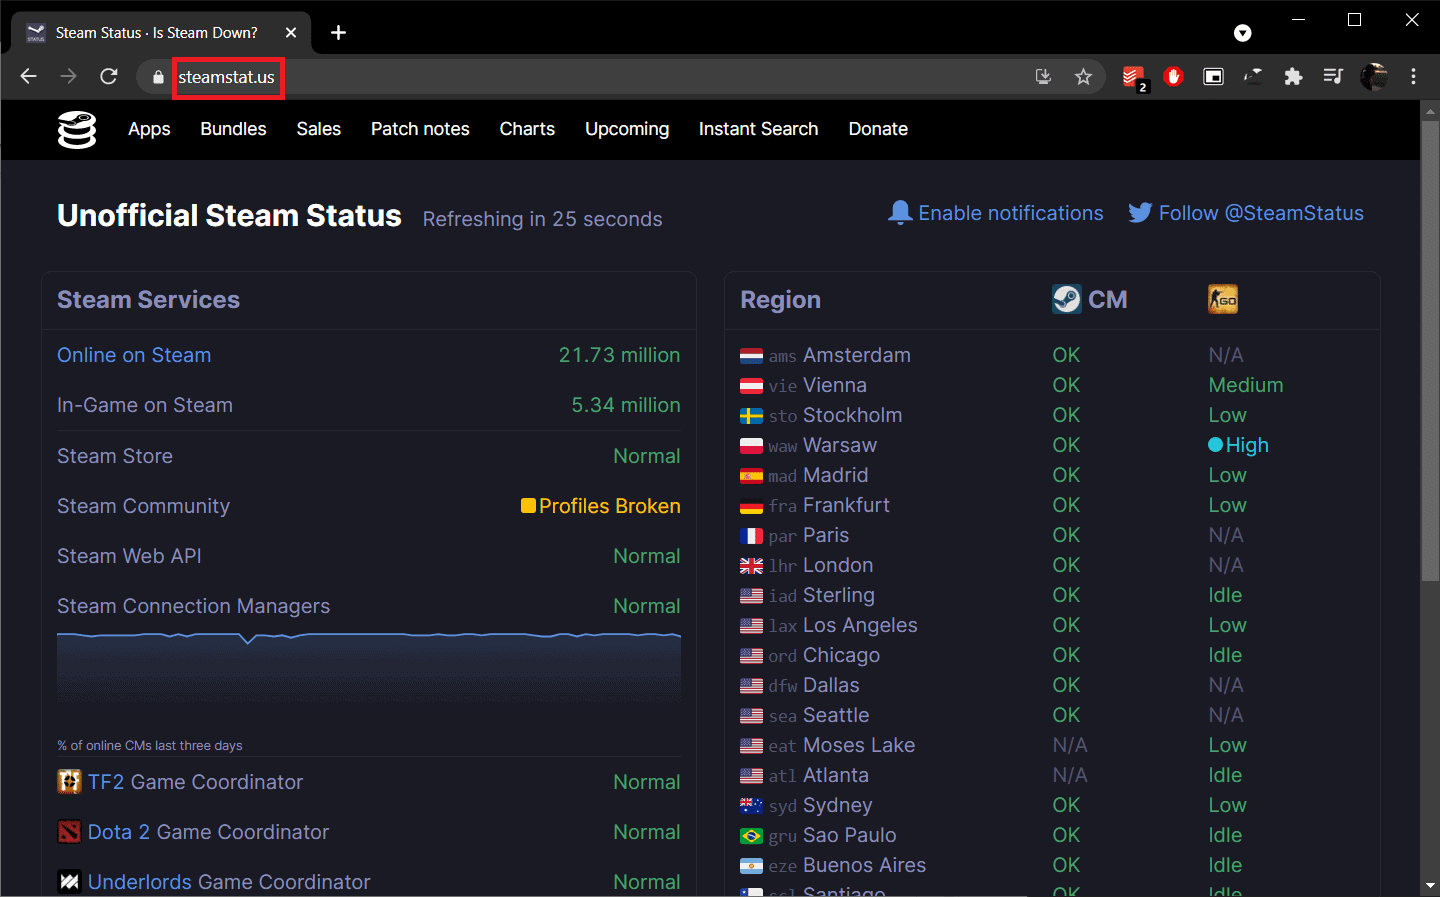 You can check out the status of the Steam servers in your region by visiting steamstat.us